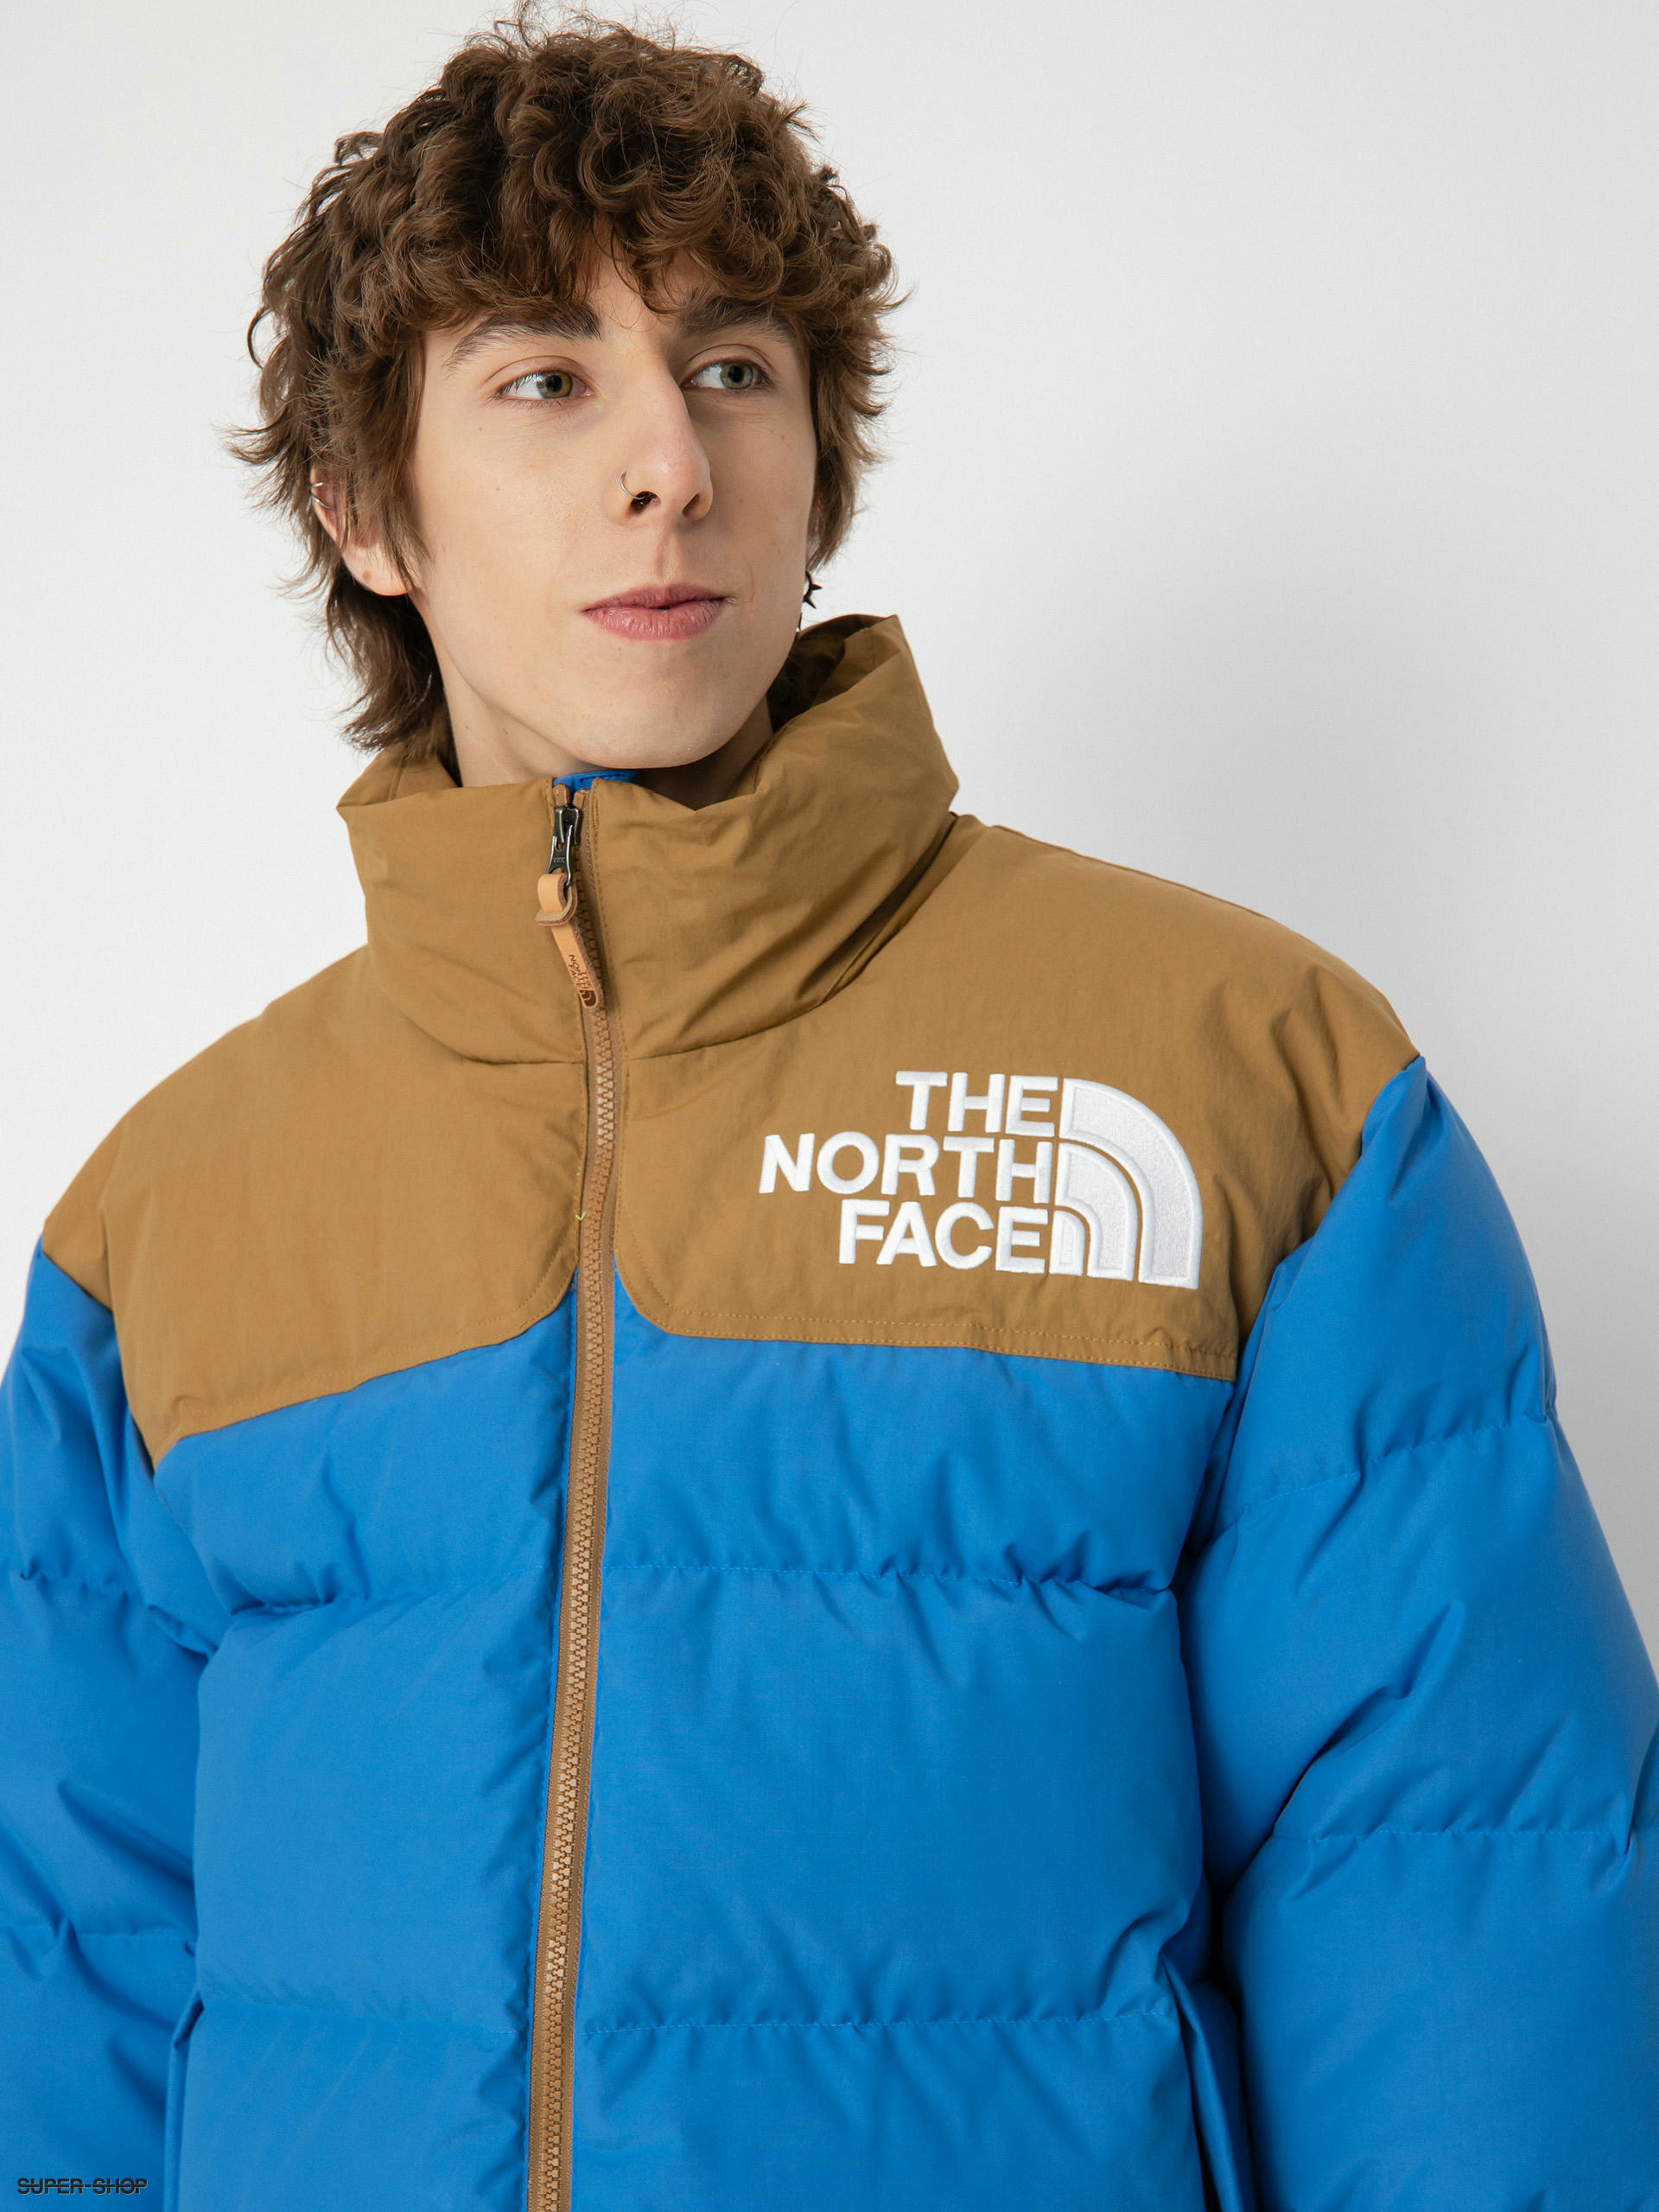 THE NORTH FACE - ボディーバッグ